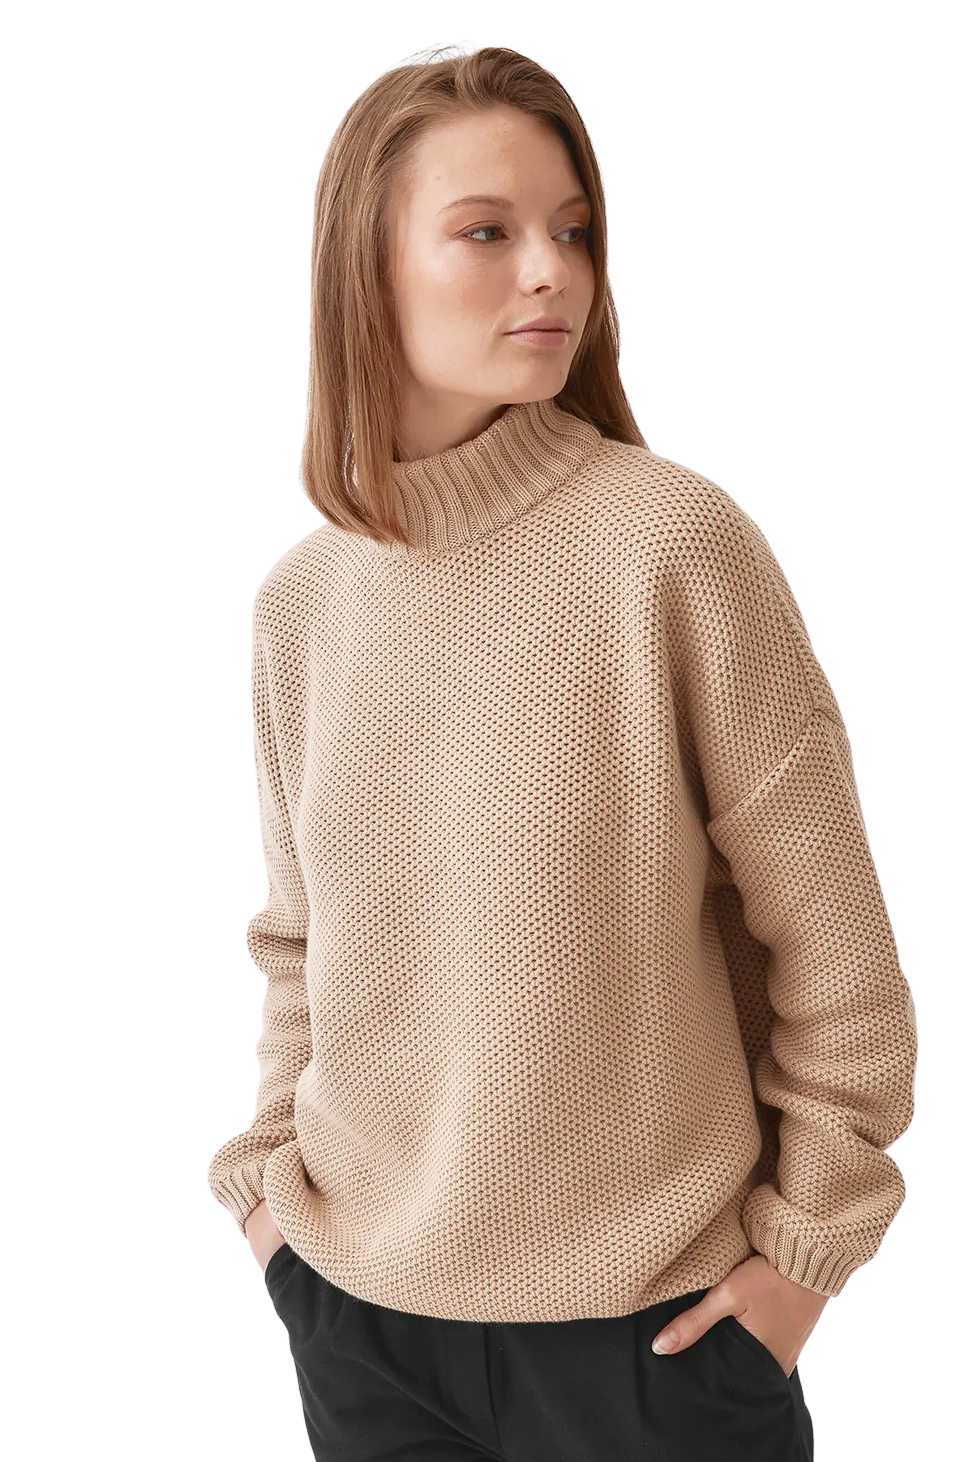 Knitted Honeycomb Pullover